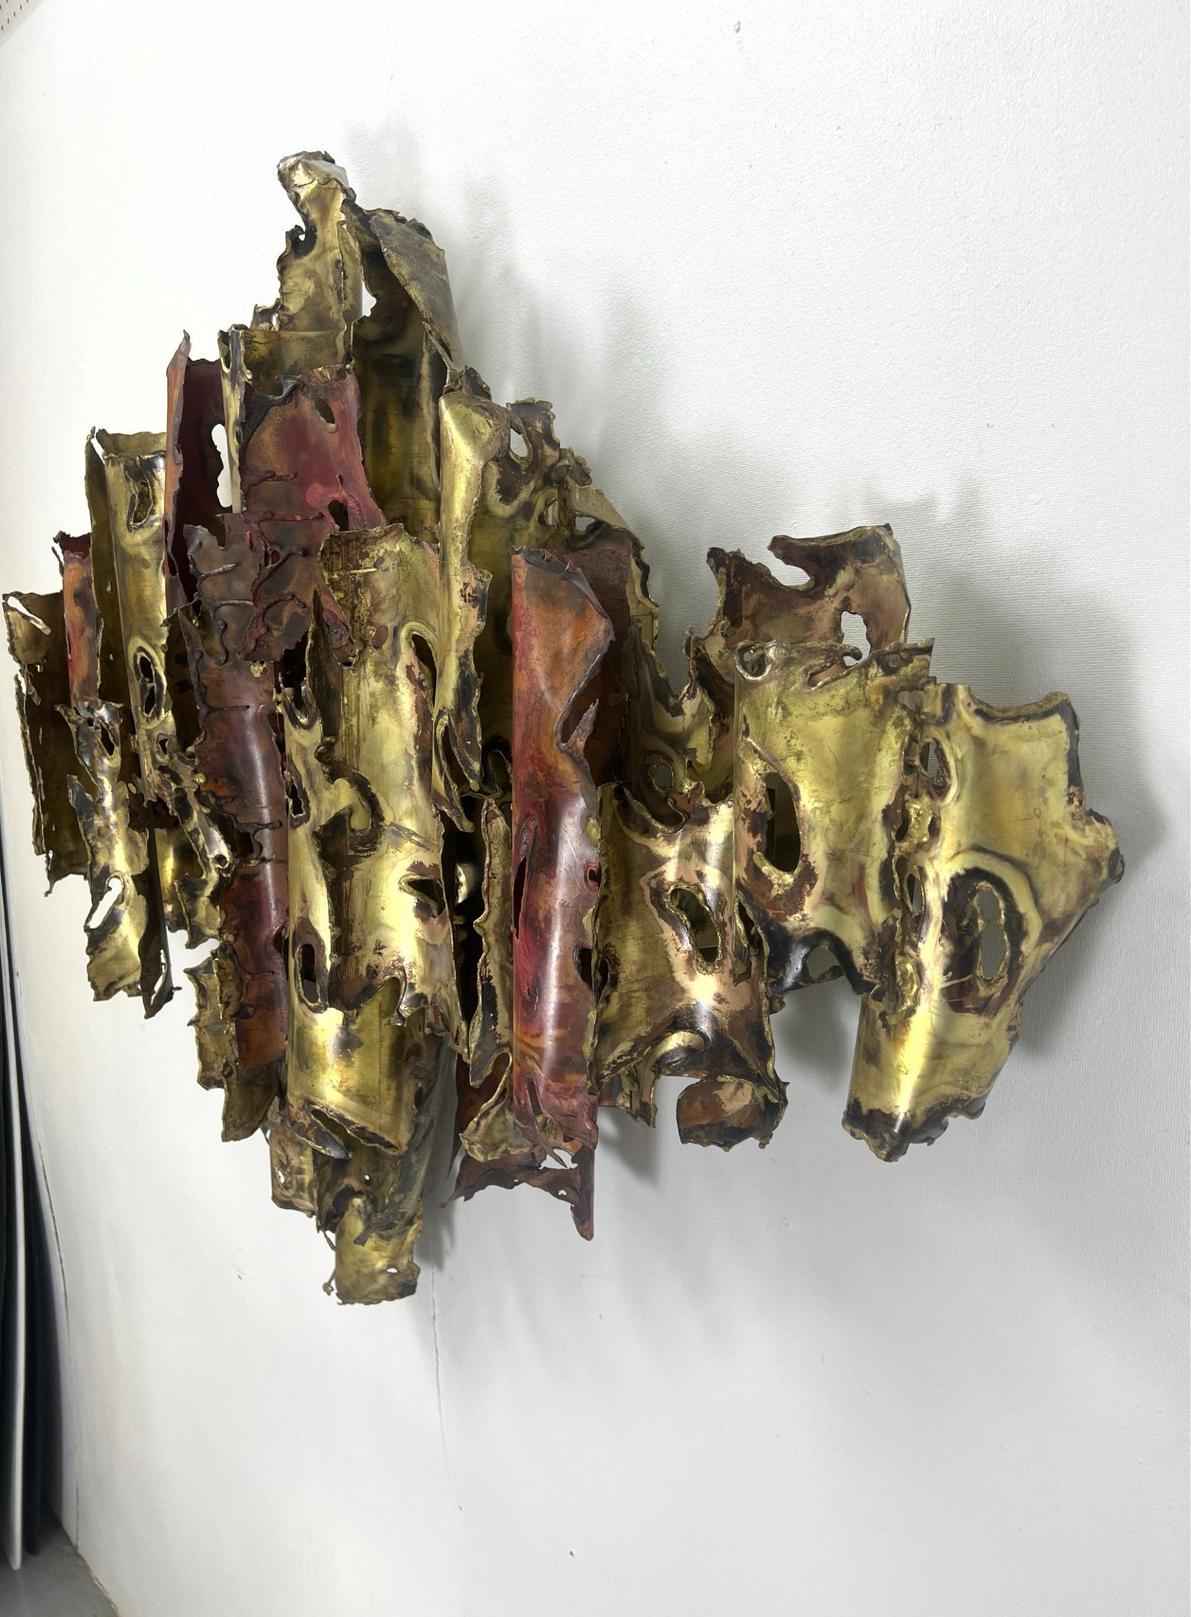 Extremely rare, important and large mixed metal wall hanging by metal artist and furniture designer, Silas Seandel. Torched Copper and Brass Curved Elements. Brutalist Modern Design. Signed and dated '74. Dimensions: H: 39 inches: W: 53 inches: D: